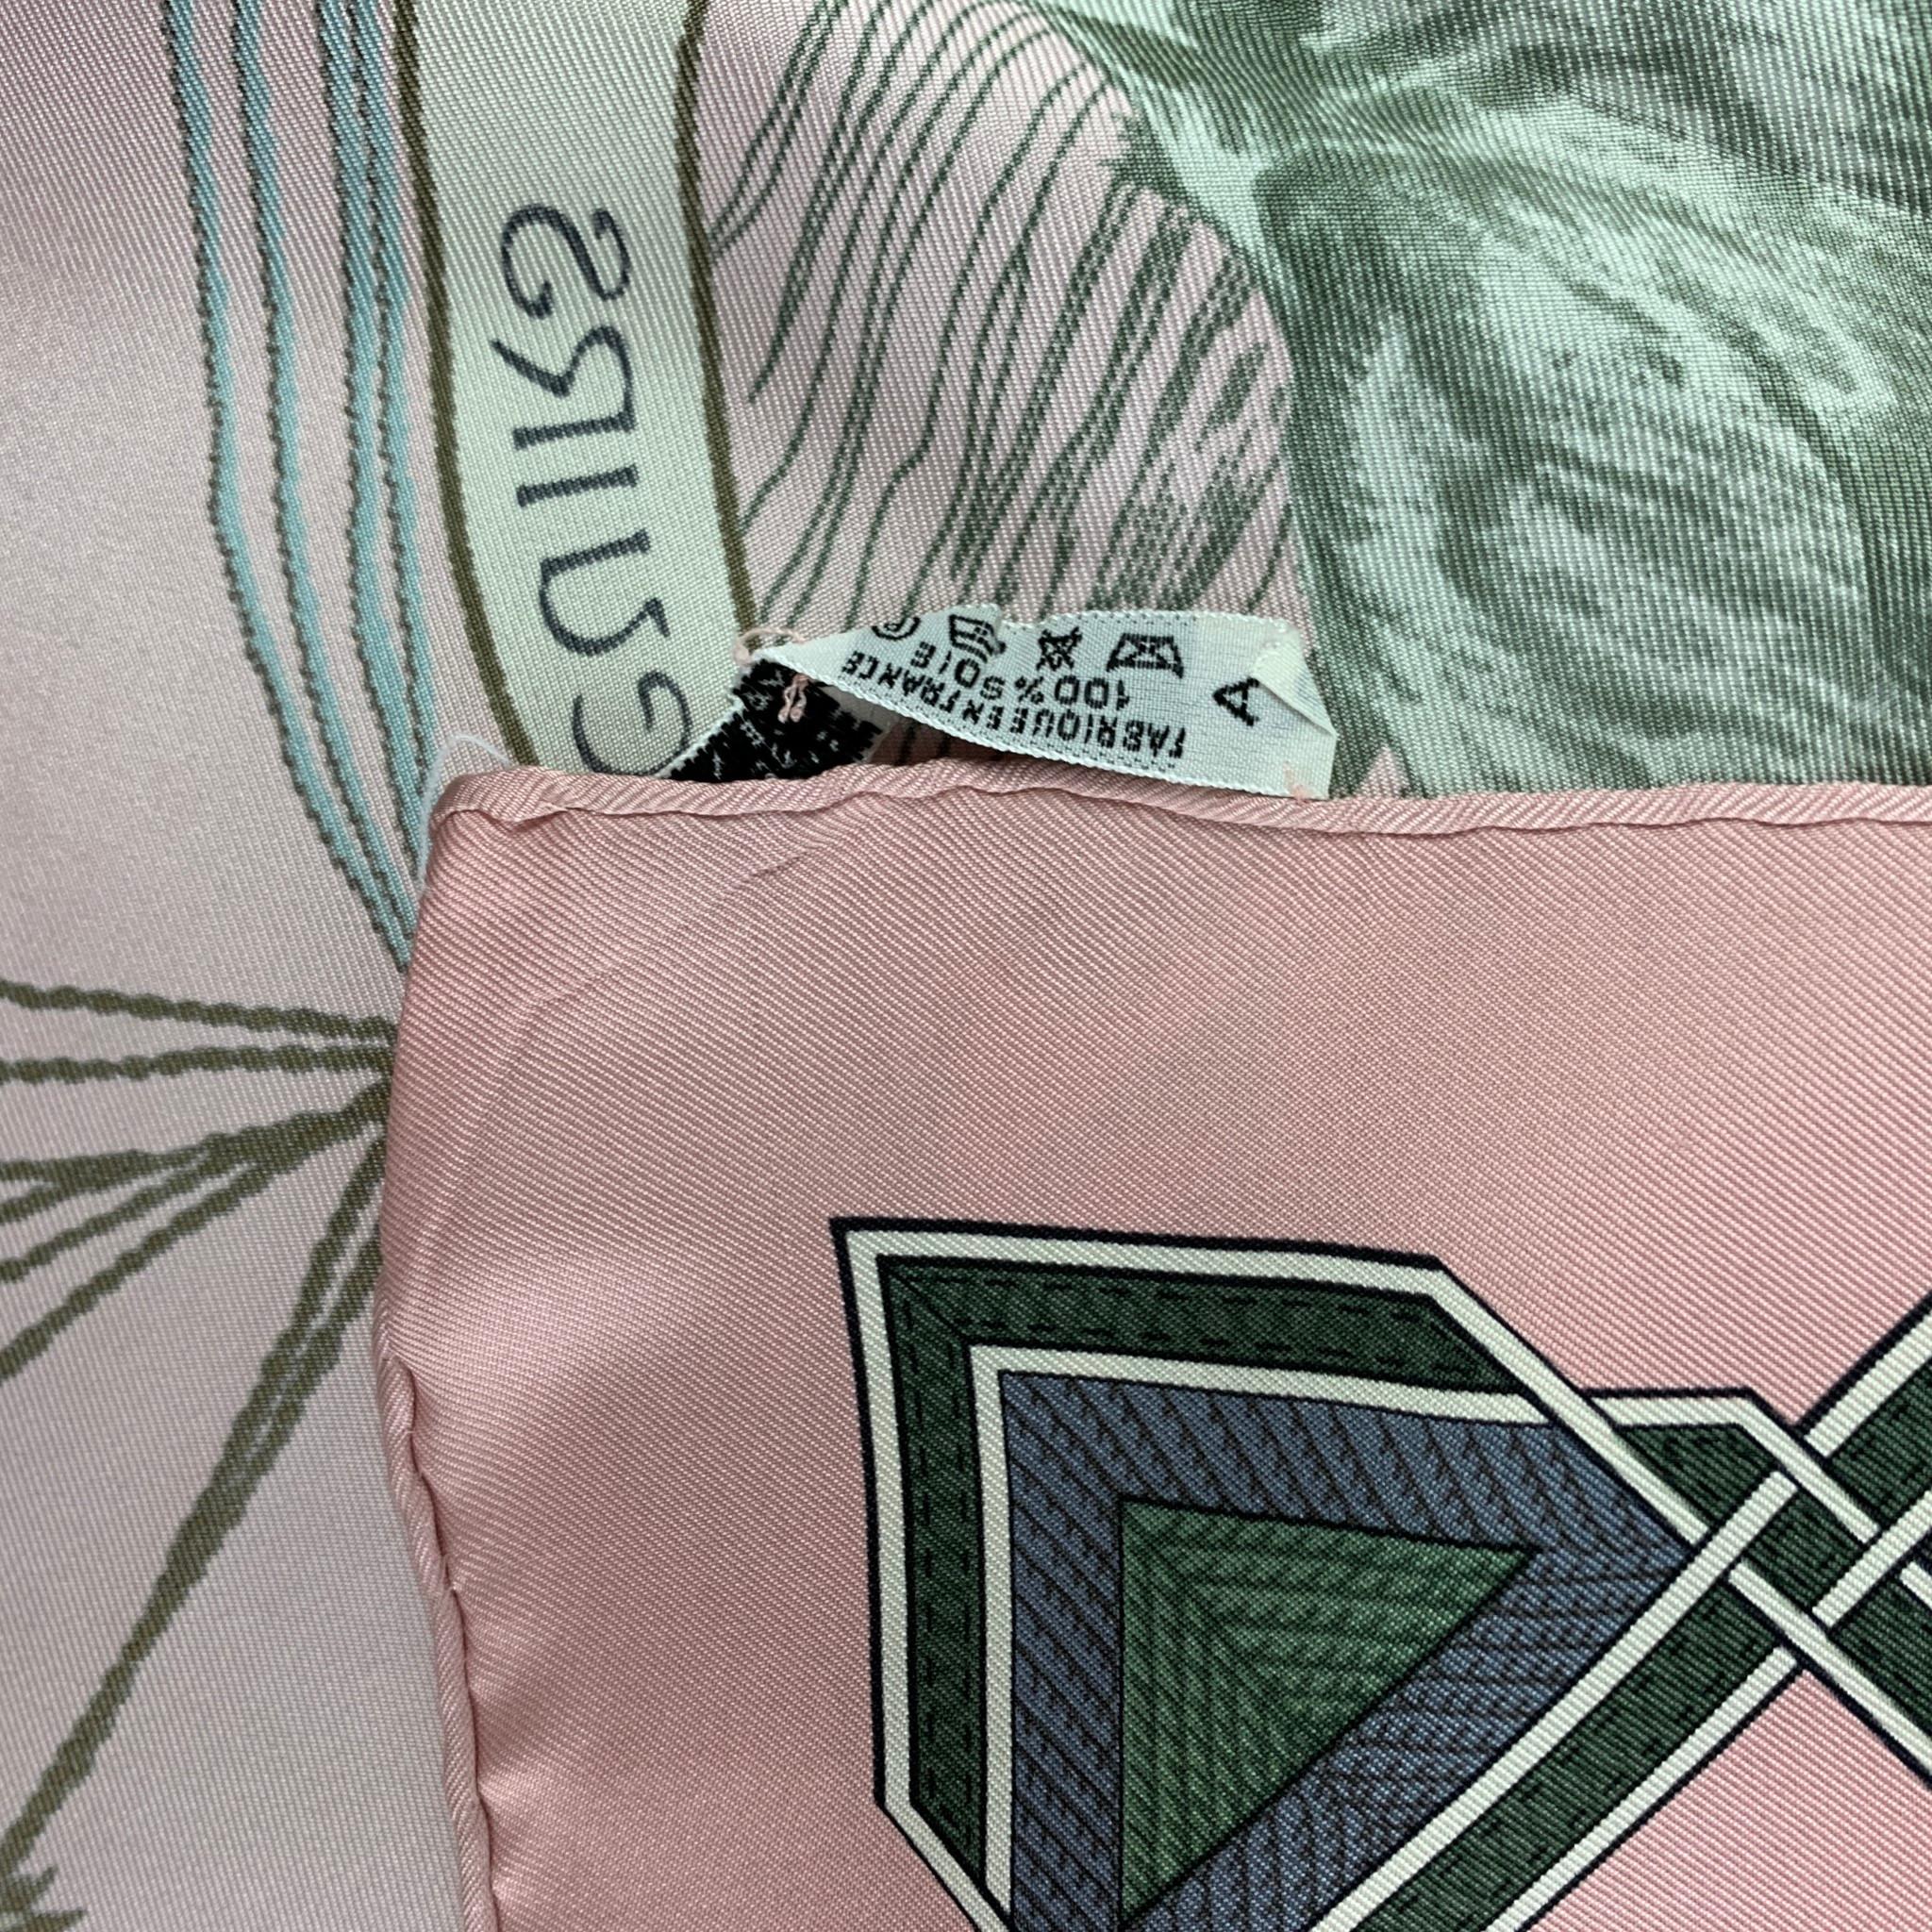 HERMES 'Cuirs Du Desert' scarf comes in a pink & black print silk with hand rolled edges. Includes box. Made in France. 

Very Good Pre-Owned Condition.

Measurements:

35 in. x 35 in. 

 